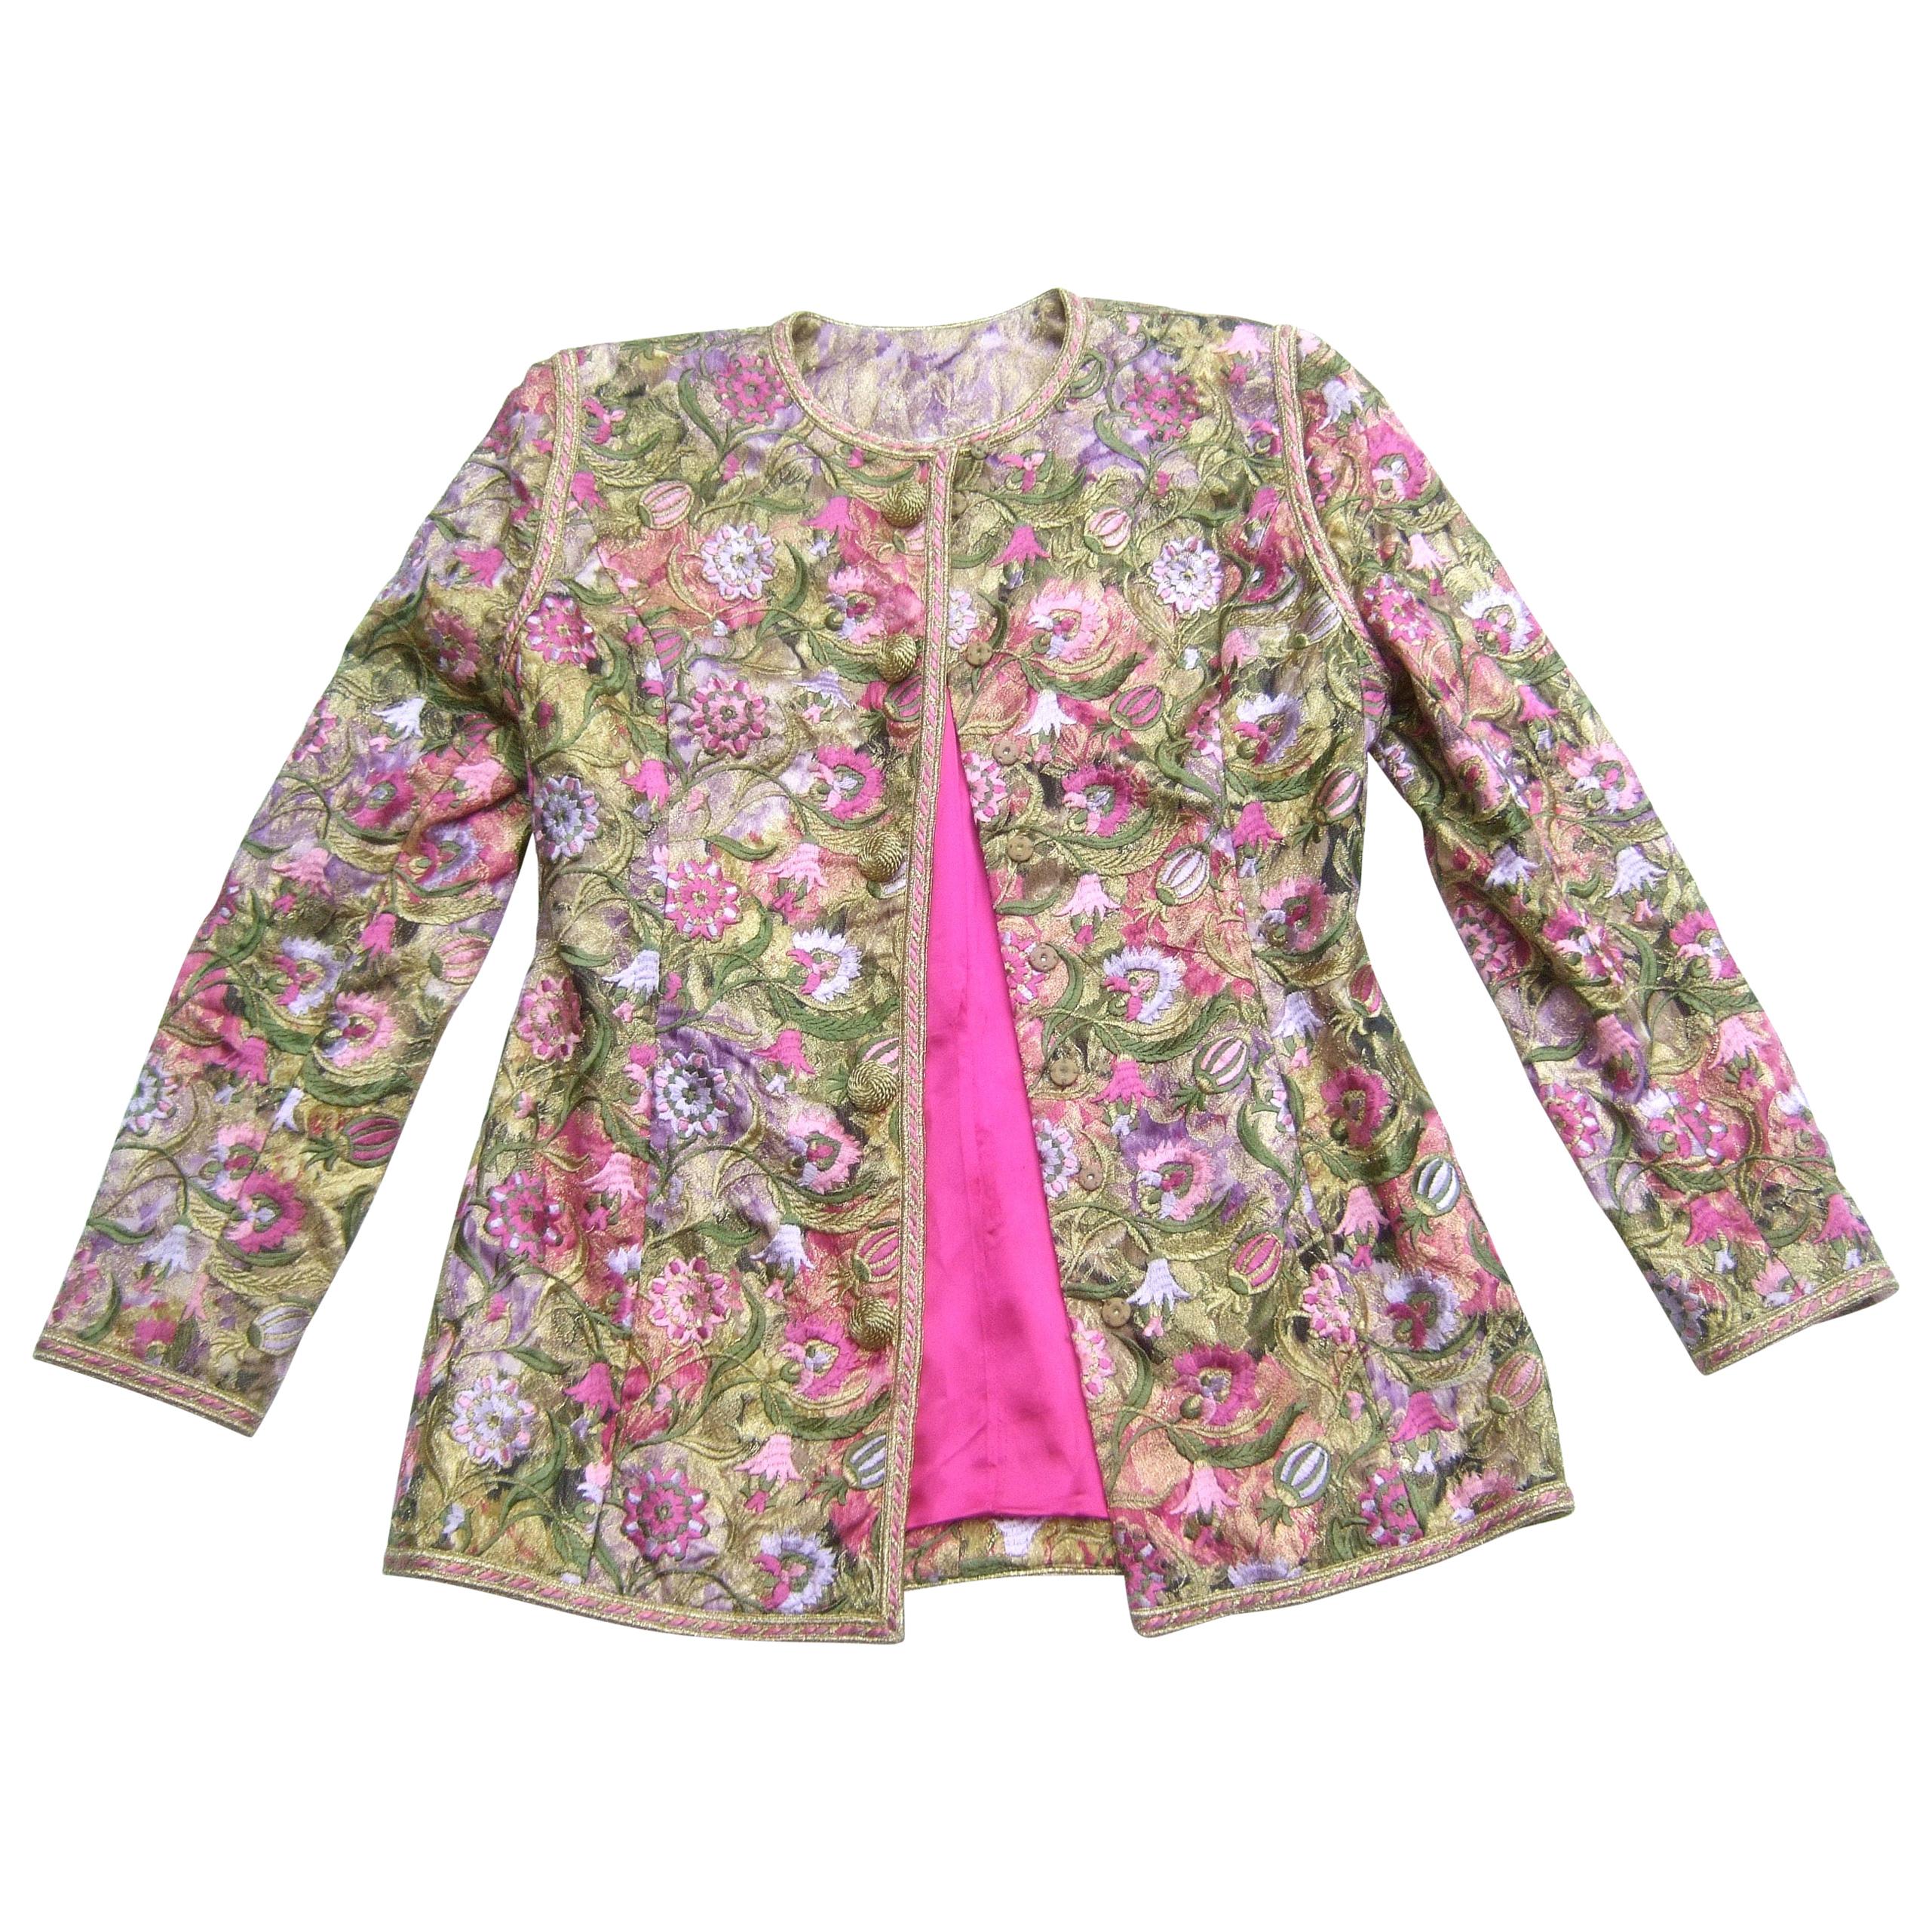 Saks Fifth Avenue Pastel Floral Embroidered Jacket by Victor Costa c 1980s